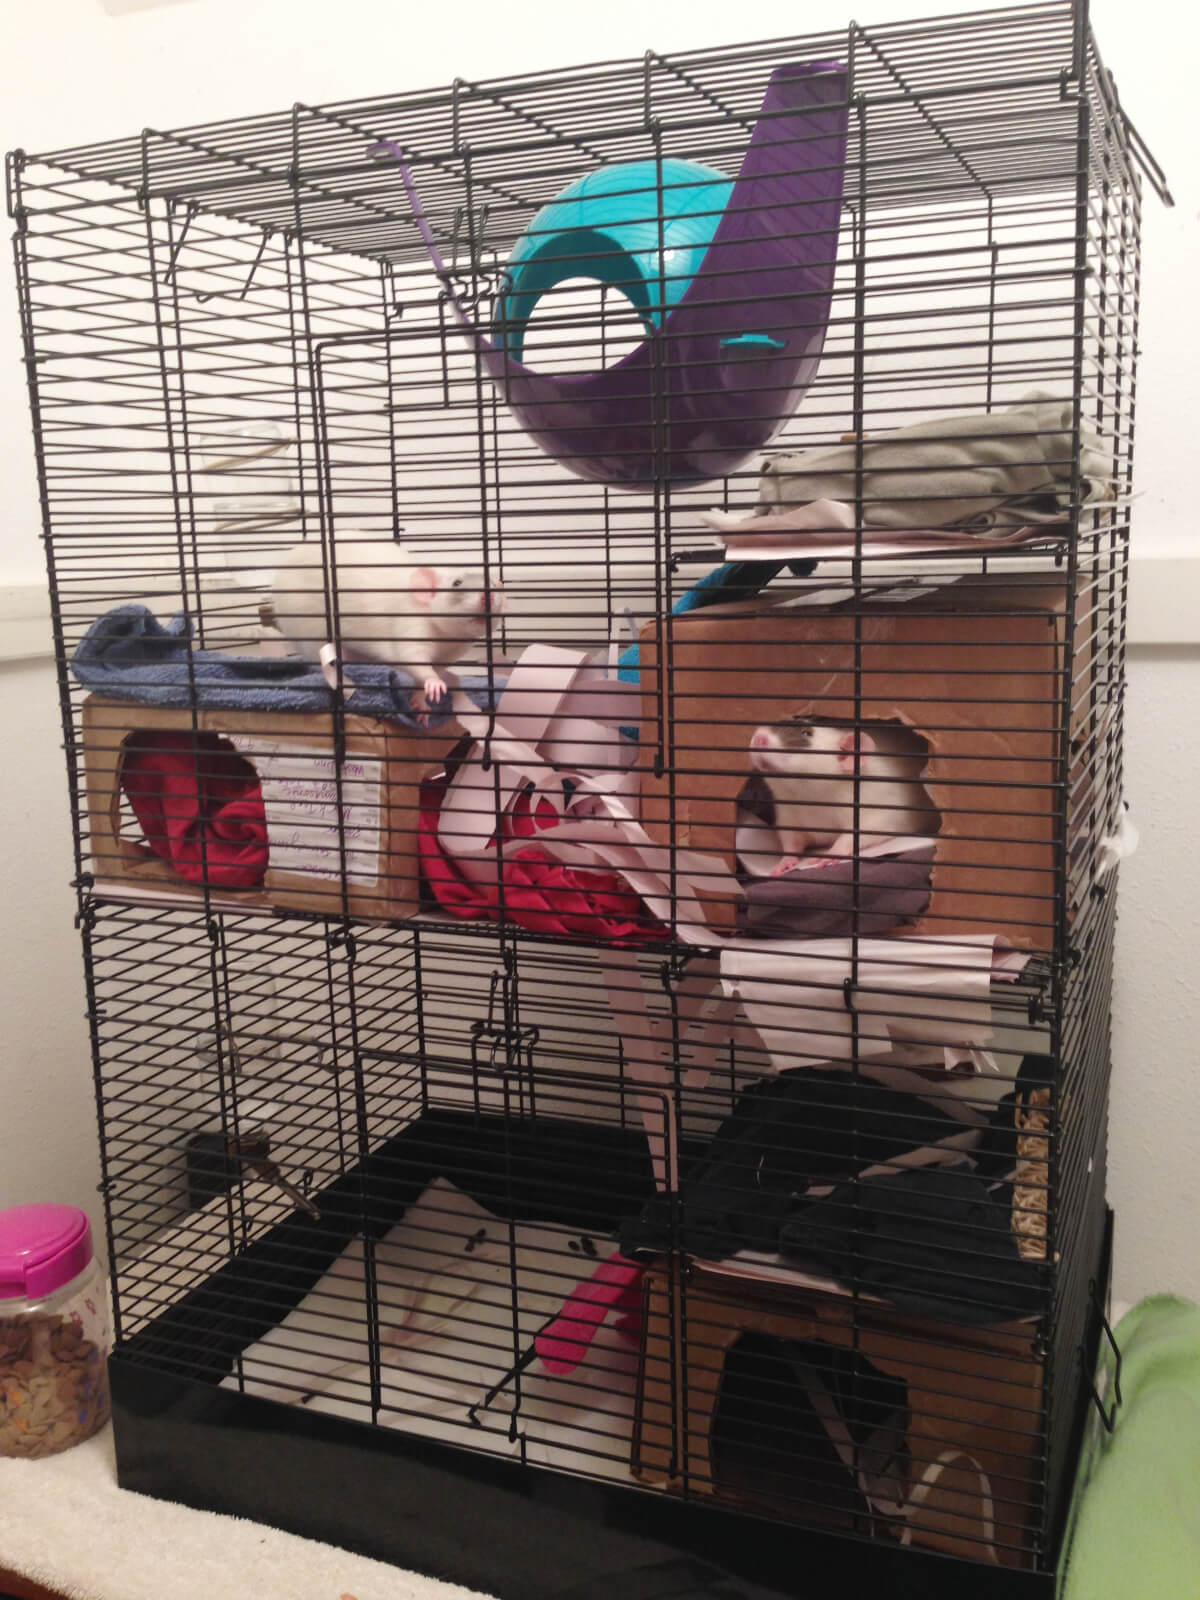 Pet Rat Cages: Finding the perfect palace - About Pet Rats